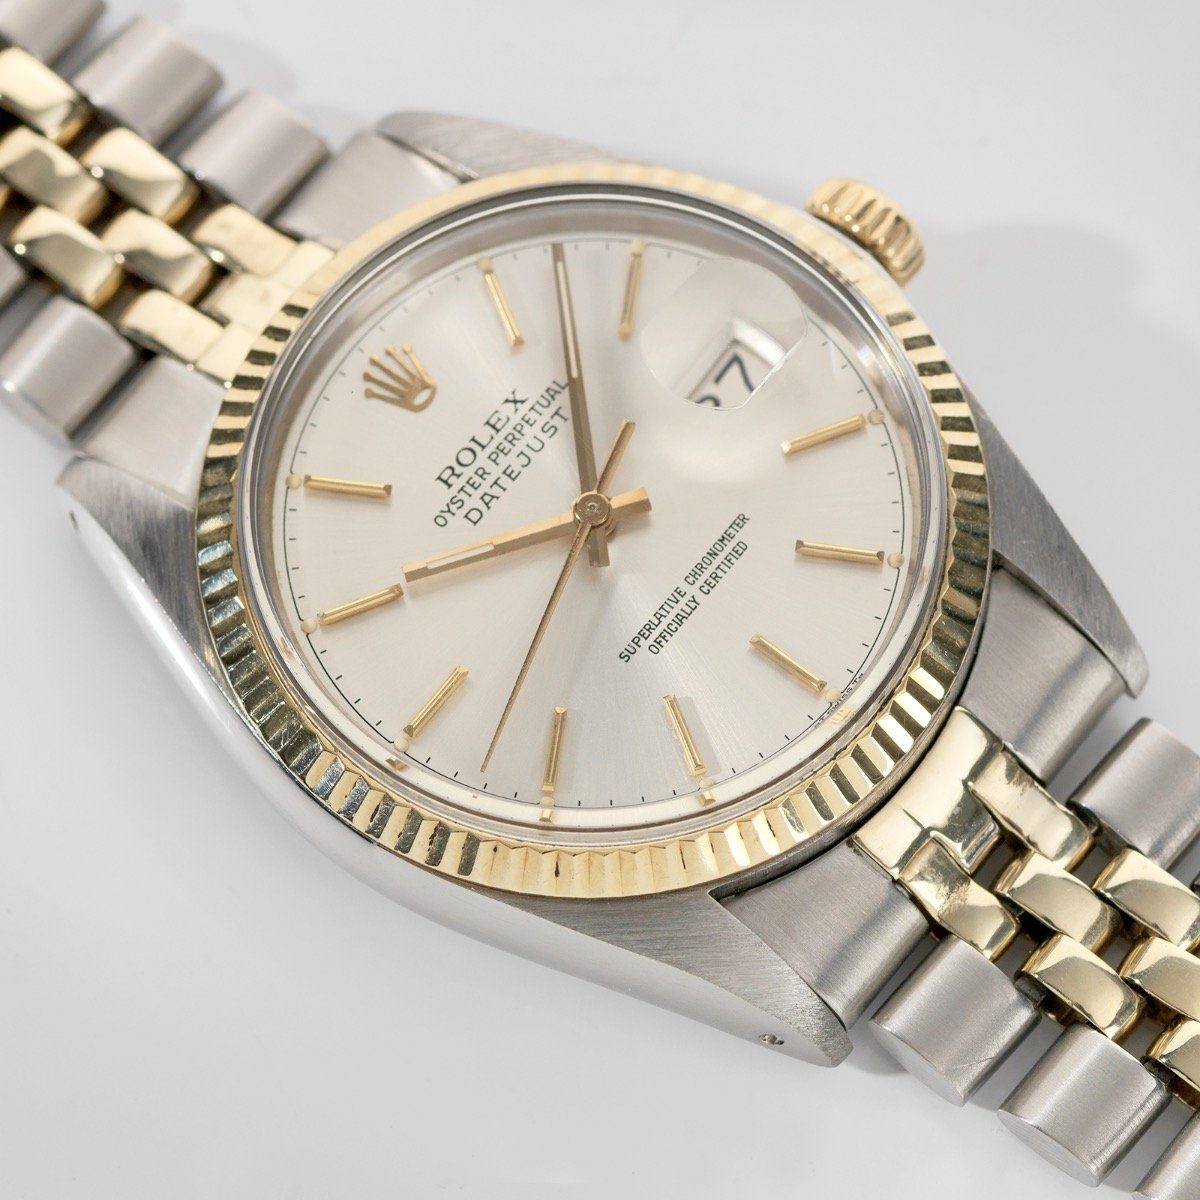 Rolex Datejust Rare Chapter-Ring Dial 16013